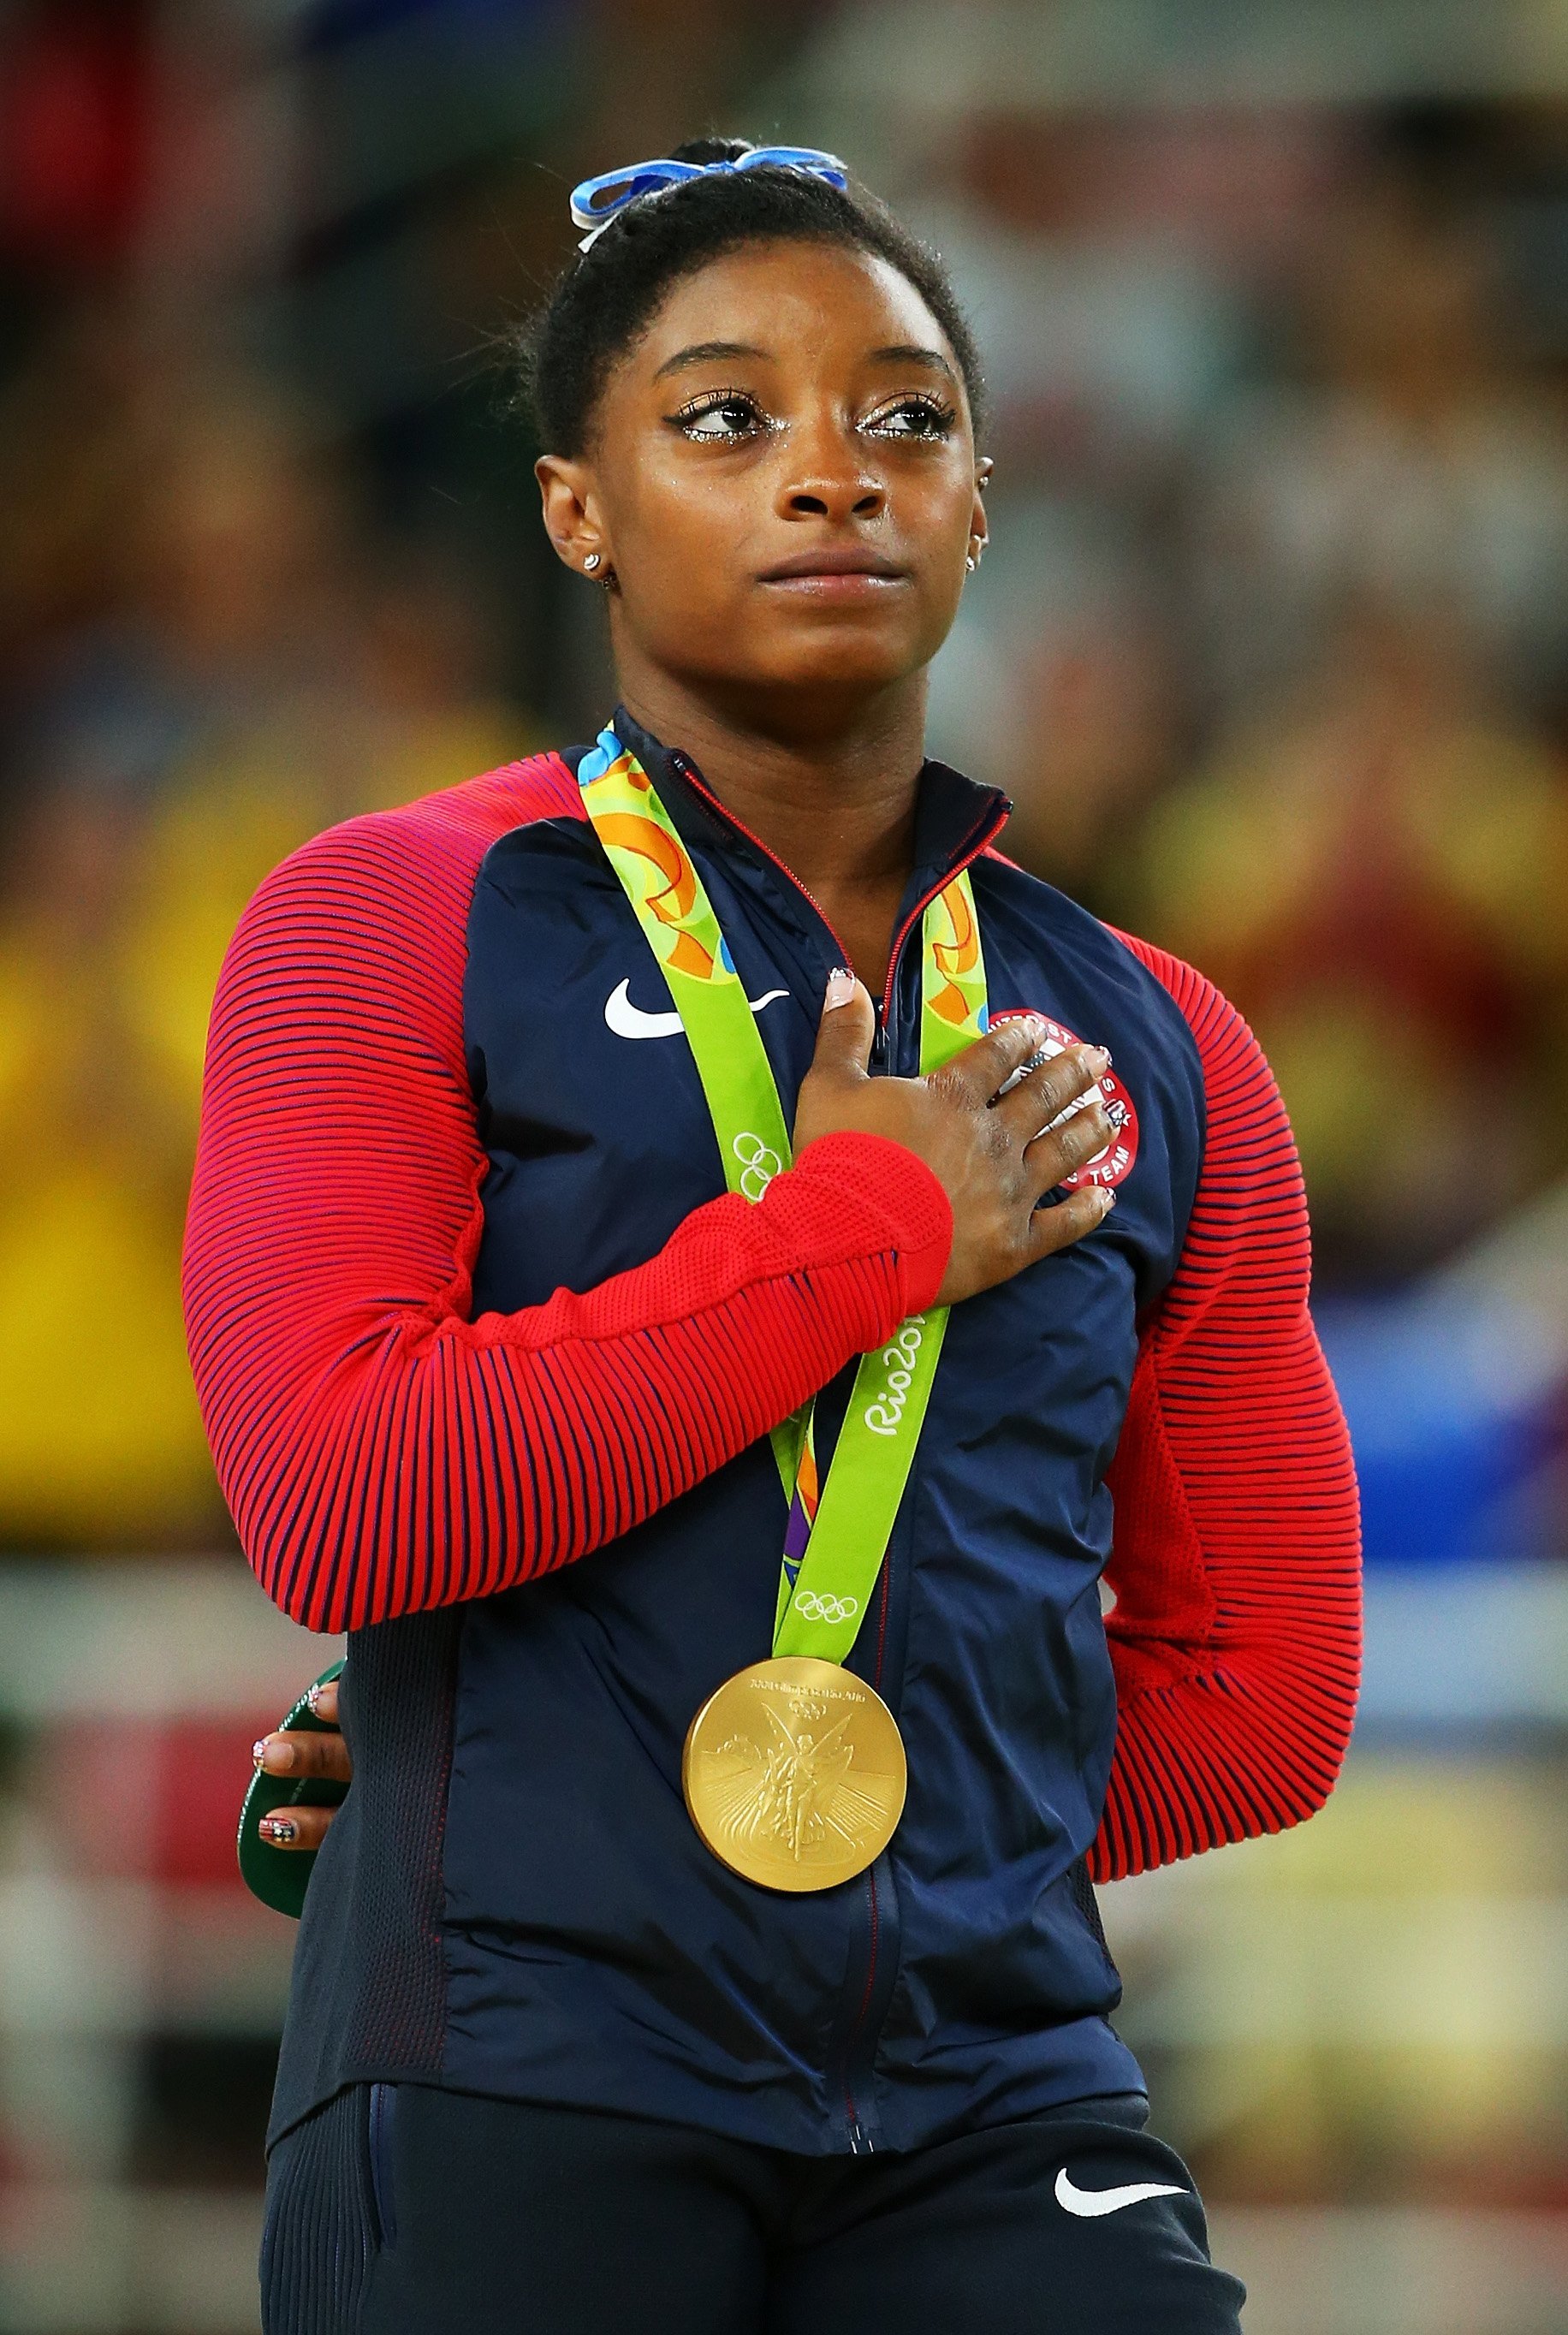  Simone Biles of the United States celebrates on the podium on Day 6 of the 2016 Rio Olympics. | Source: Getty Images